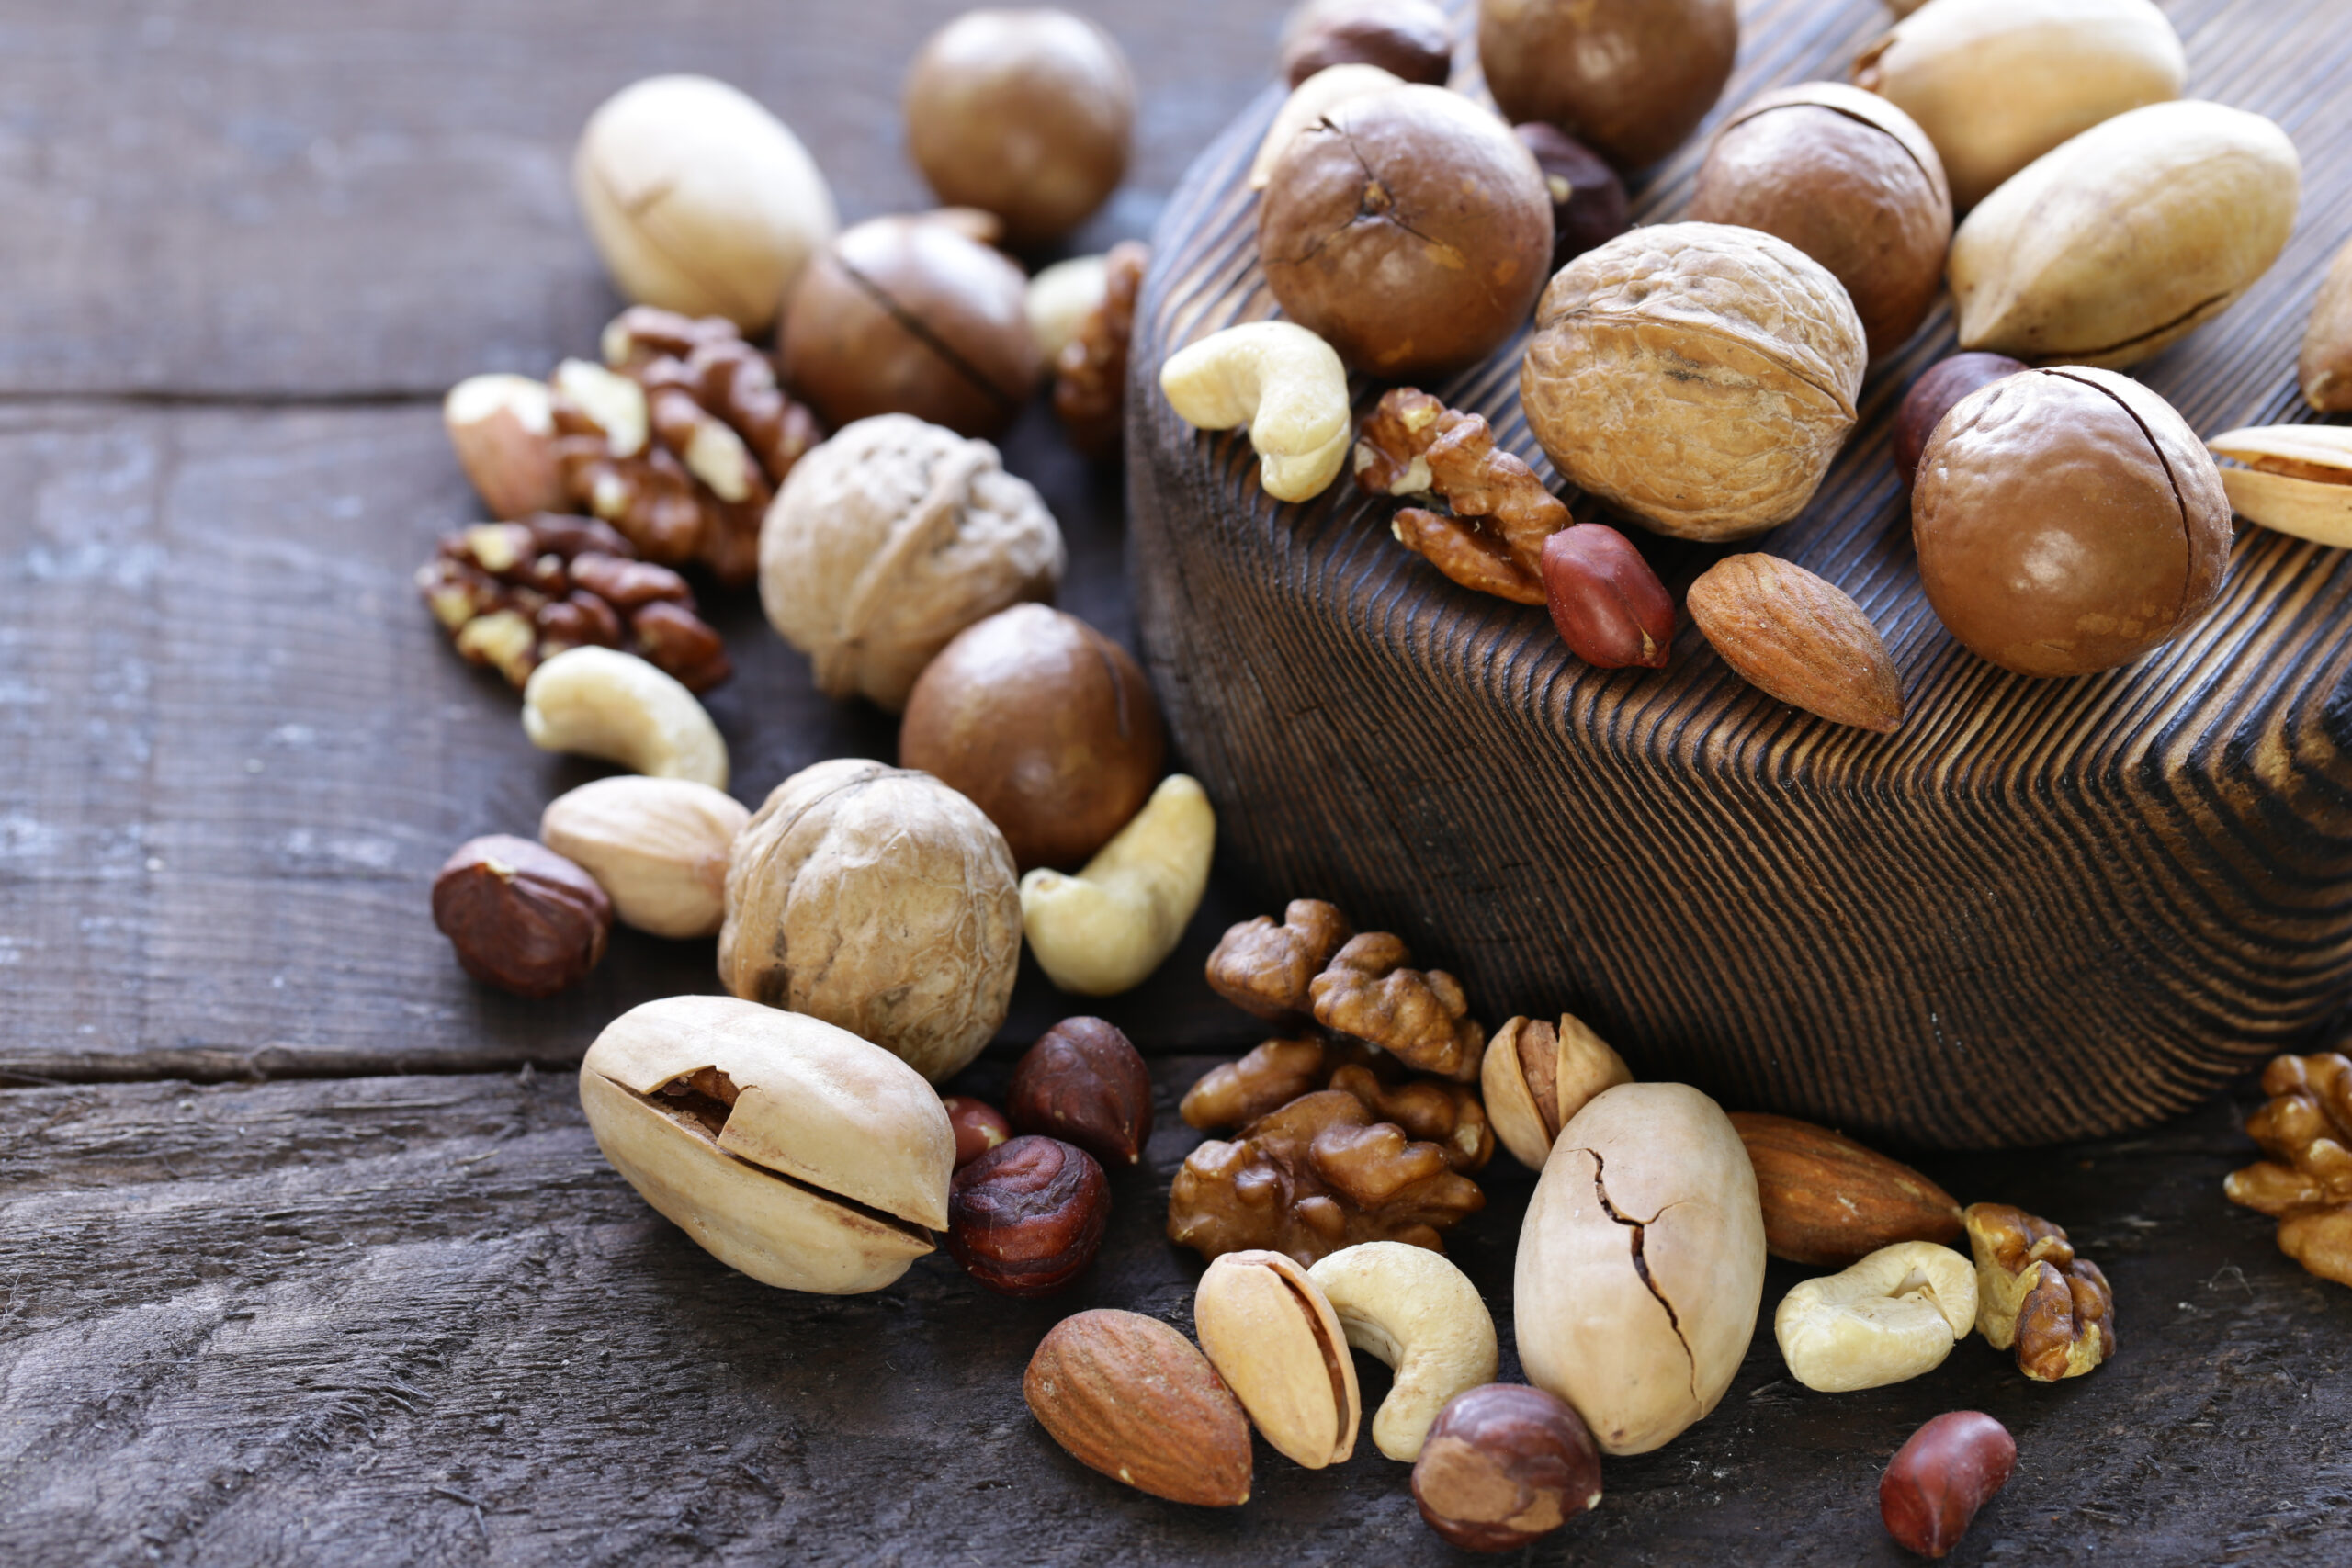 various nuts - macadamis, cashews, almonds and walnuts